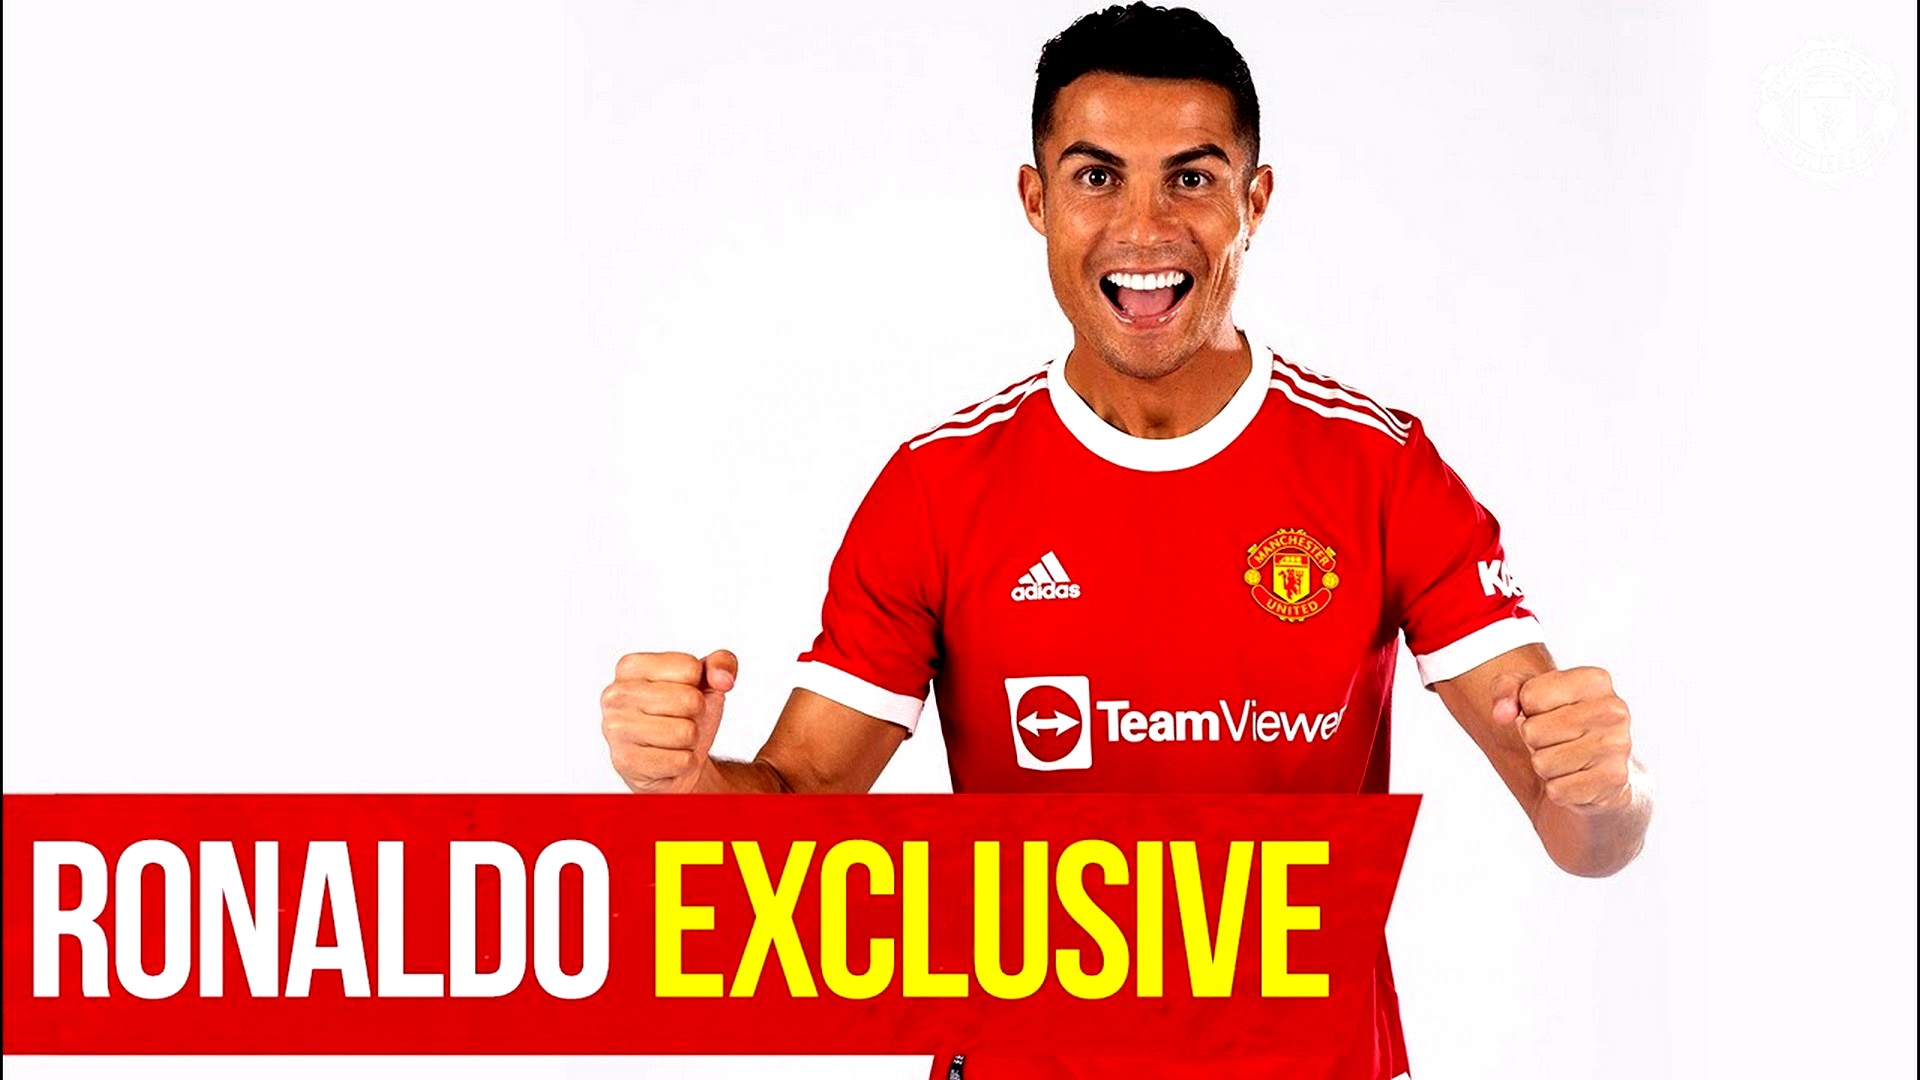 Cristiano Ronaldo Manchester United For Mac Wallpaper With high-resolution 1920X1080 pixel. You can use this wallpaper for your Desktop Computers, Mac Screensavers, Windows Backgrounds, iPhone Wallpapers, Tablet or Android Lock screen and another Mobile device